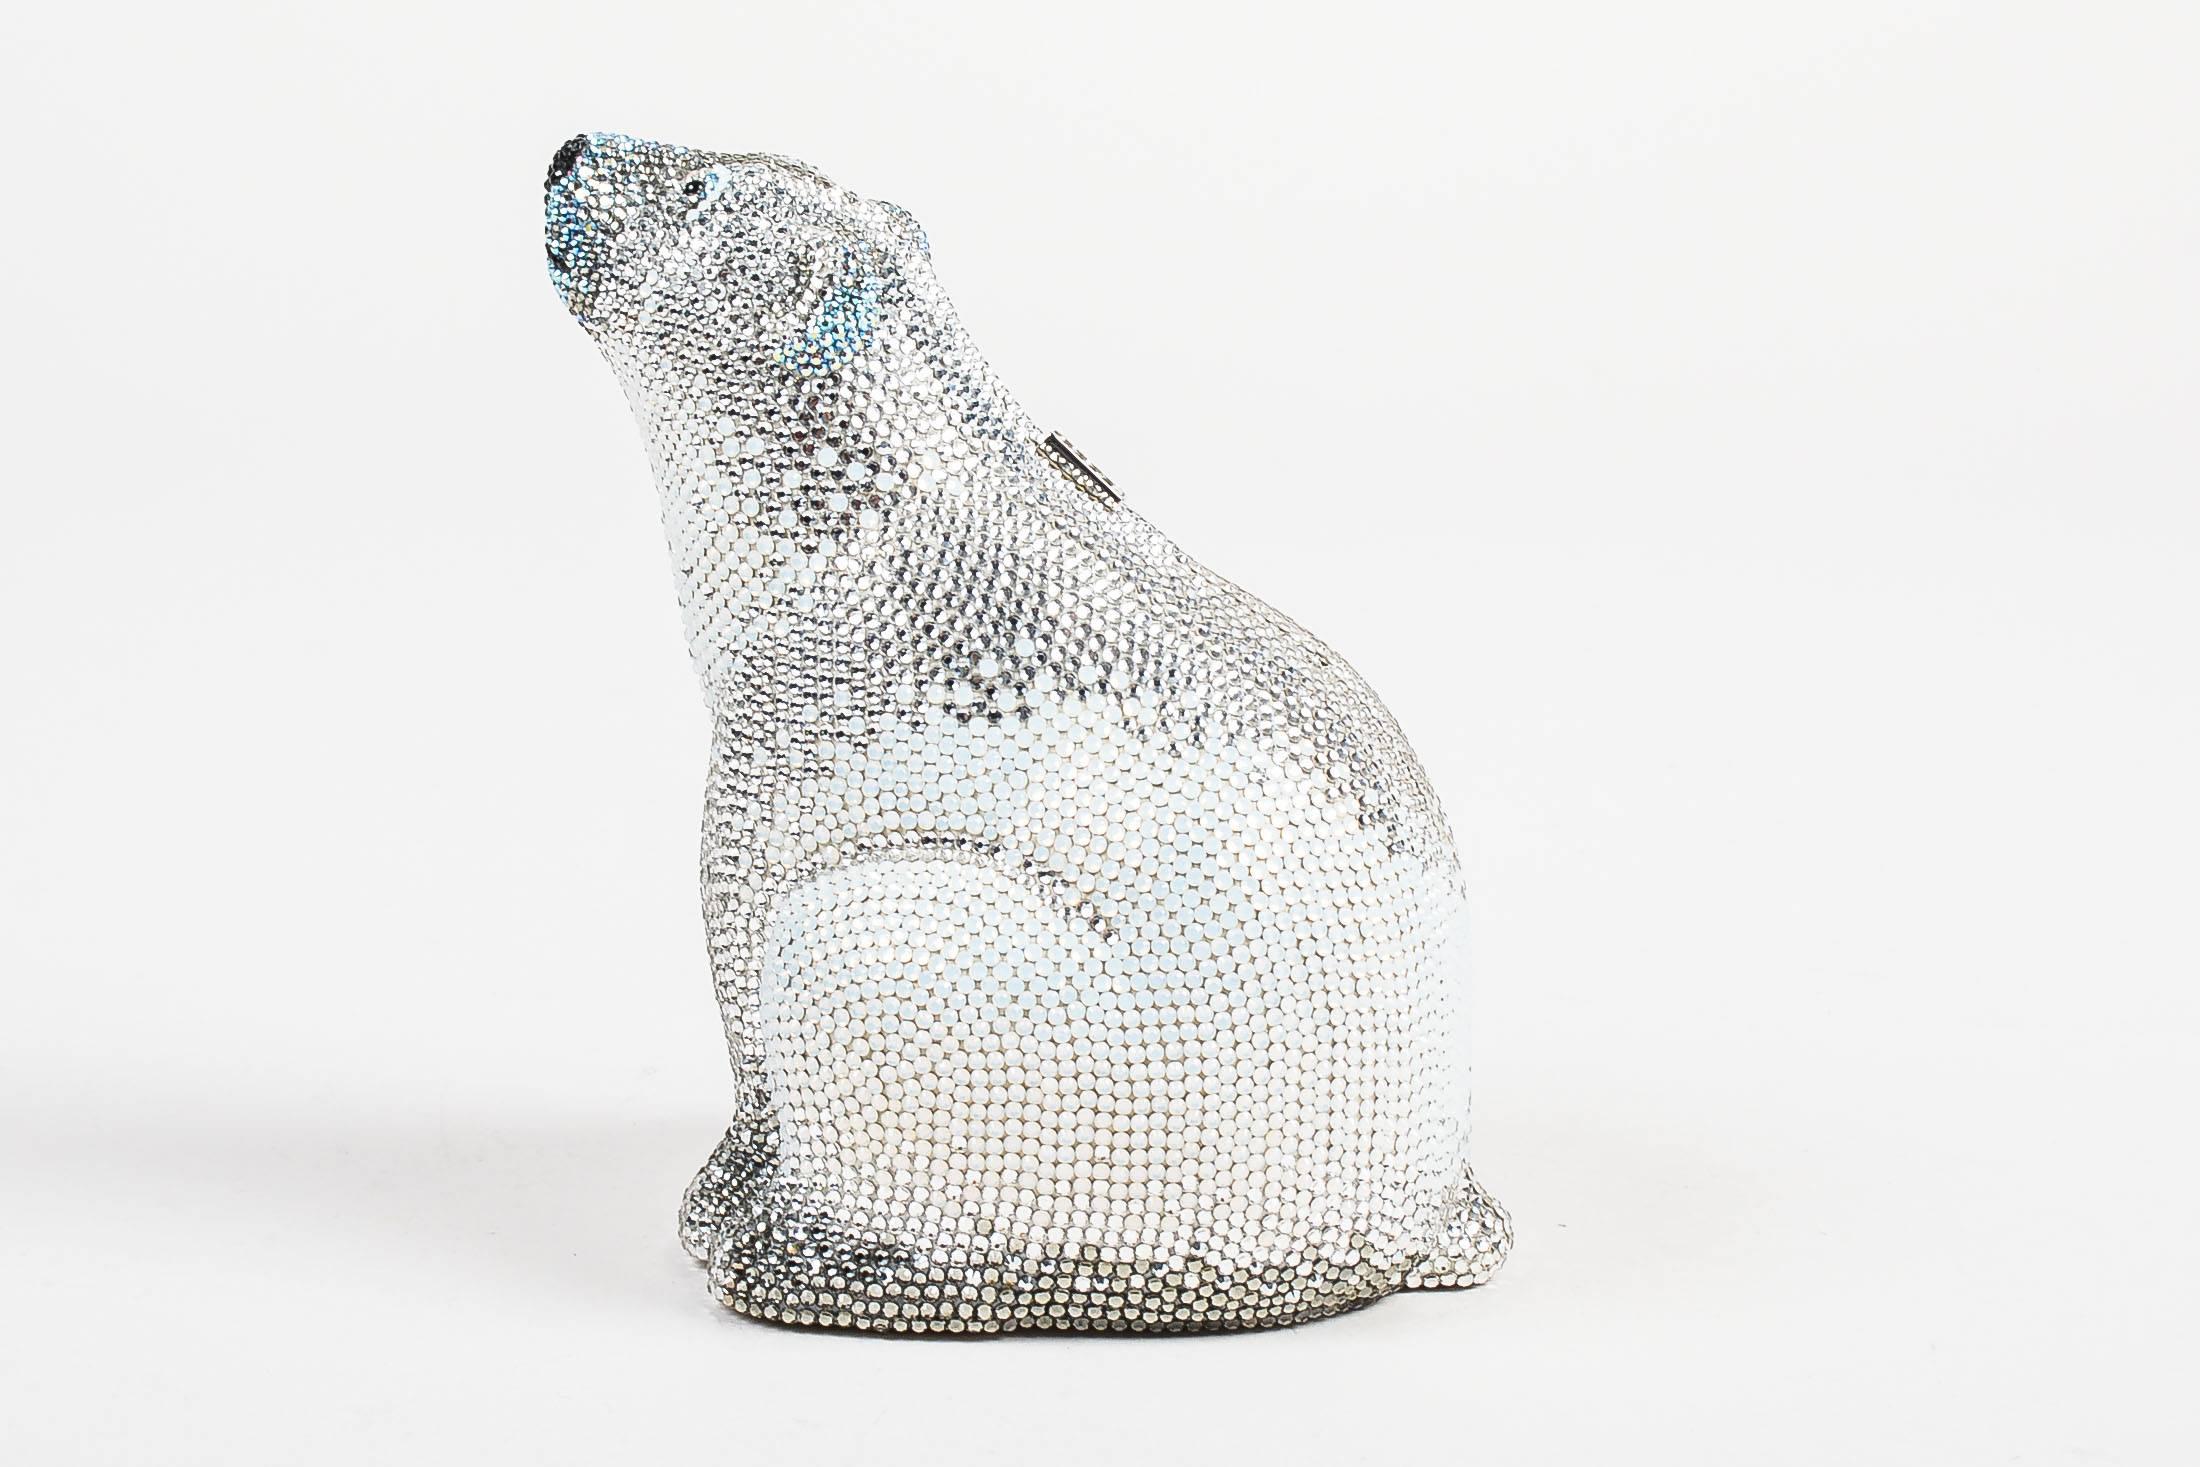 Judith Leiber Couture silver polar bear clutch adorned with rhinestone crystals. Features a push button clasp closure and silver-tone metal base. Comes in box with dust bag, an optional chain strap, coin purse, and small mirror. Lined with